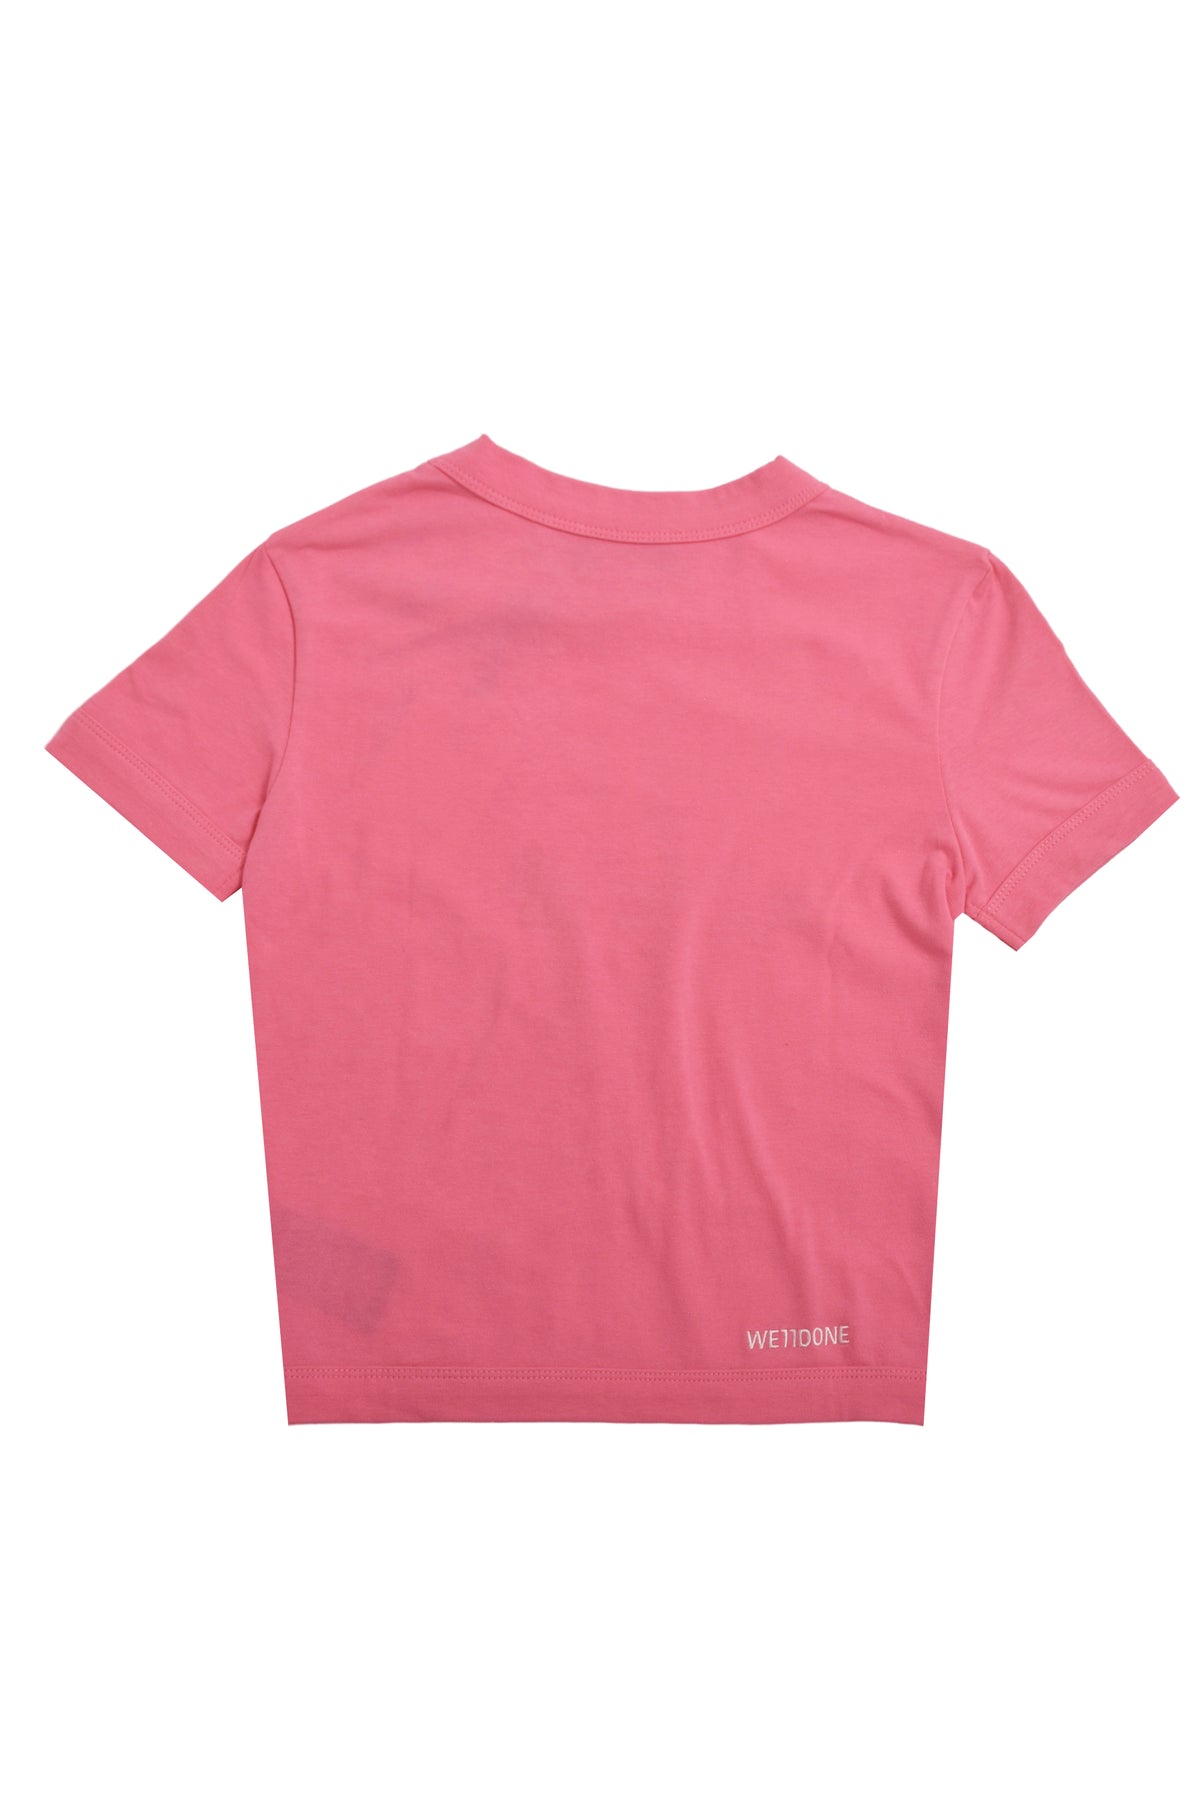 PINK WOMENS DOODLE PRINT FITTED T-SHIRT / PNK